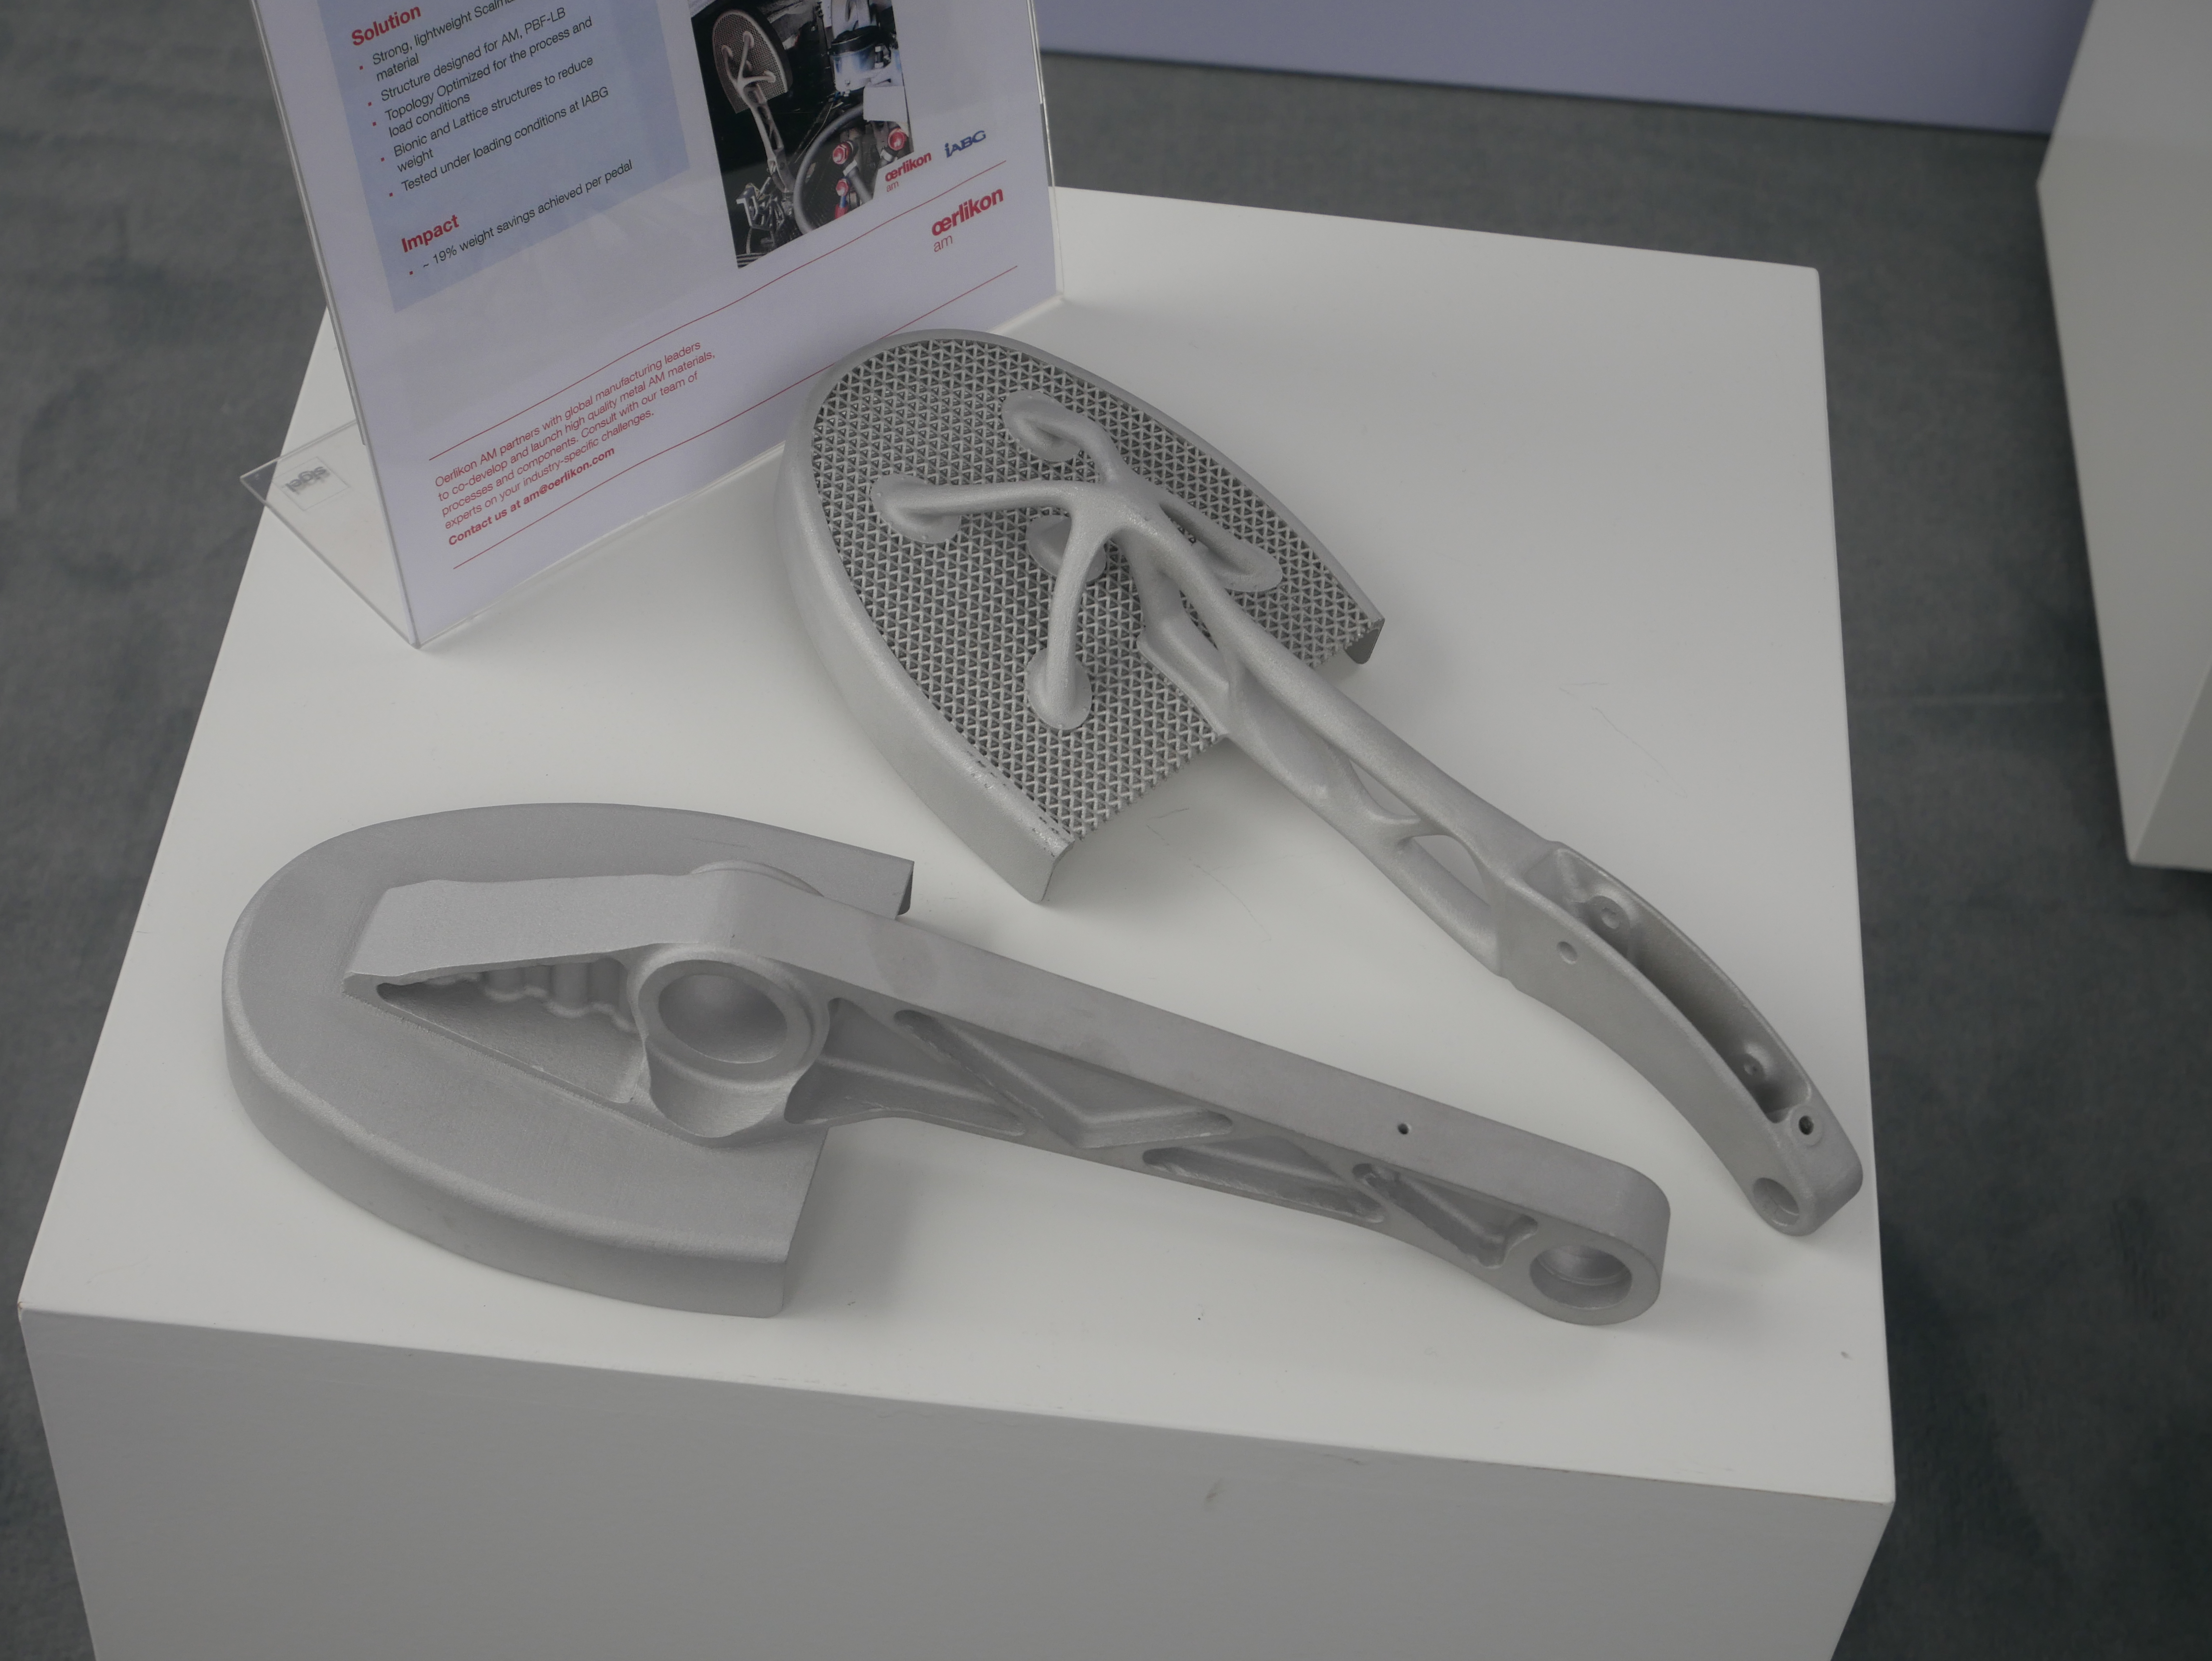 3D printed UBRacing throttle and brake pedals designed by Oerlikon. Photo by Tia Vialva.